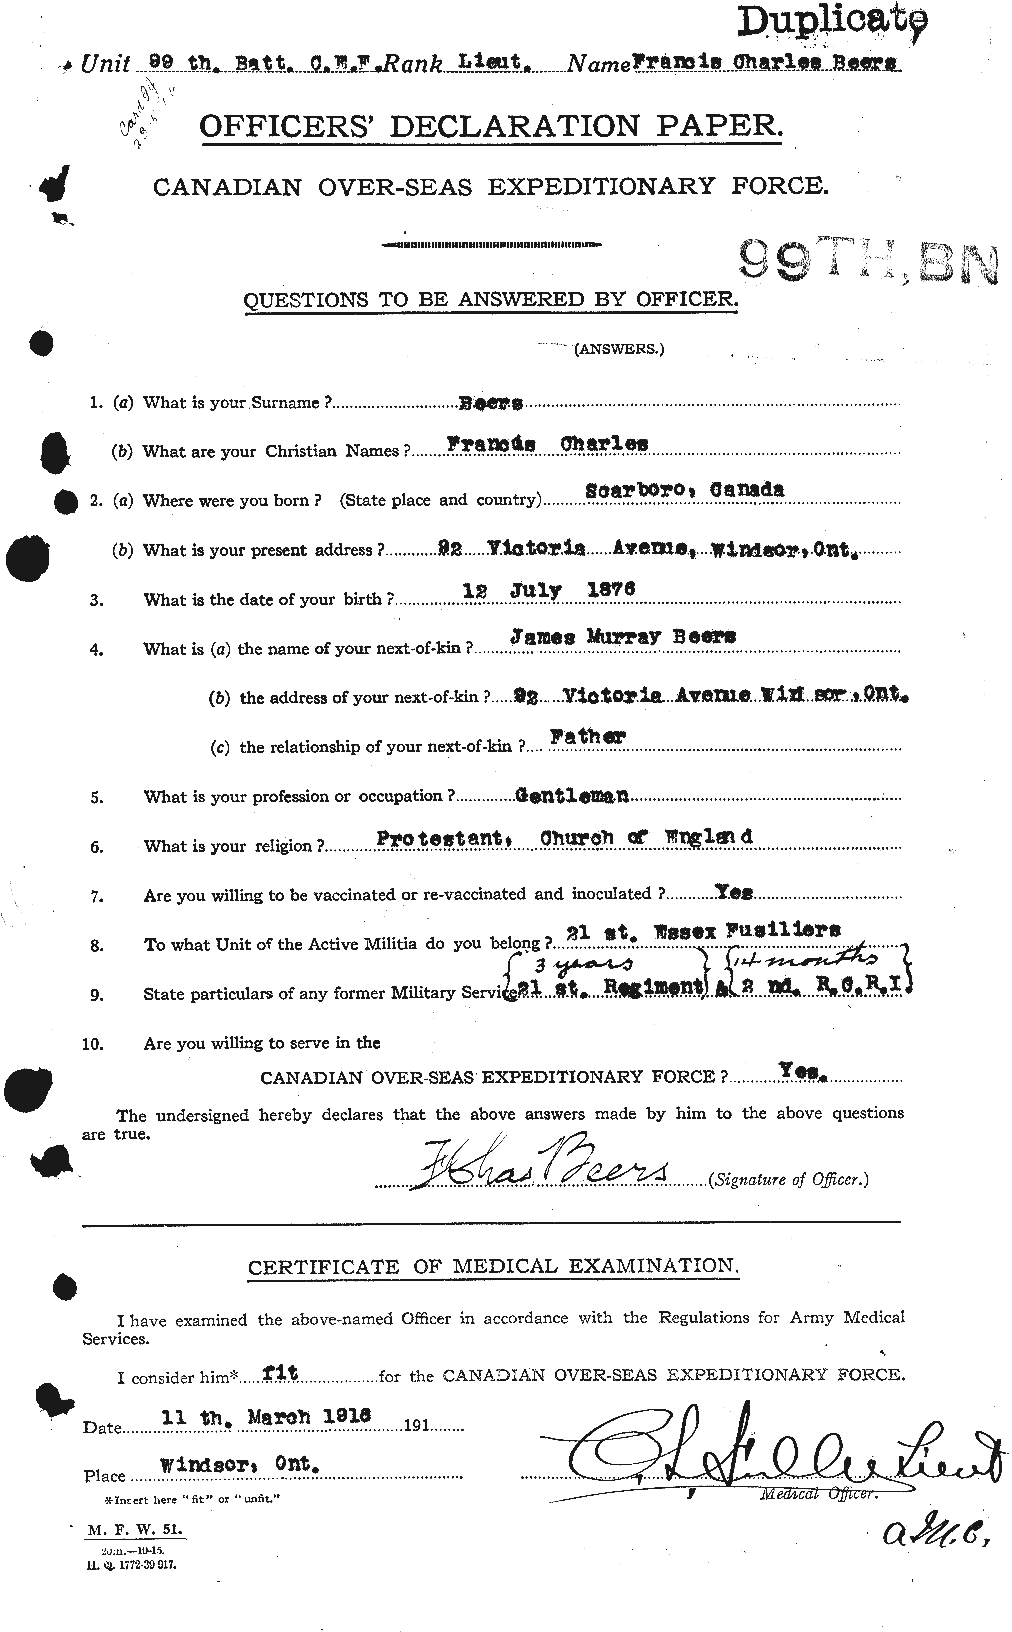 Personnel Records of the First World War - CEF 241595a